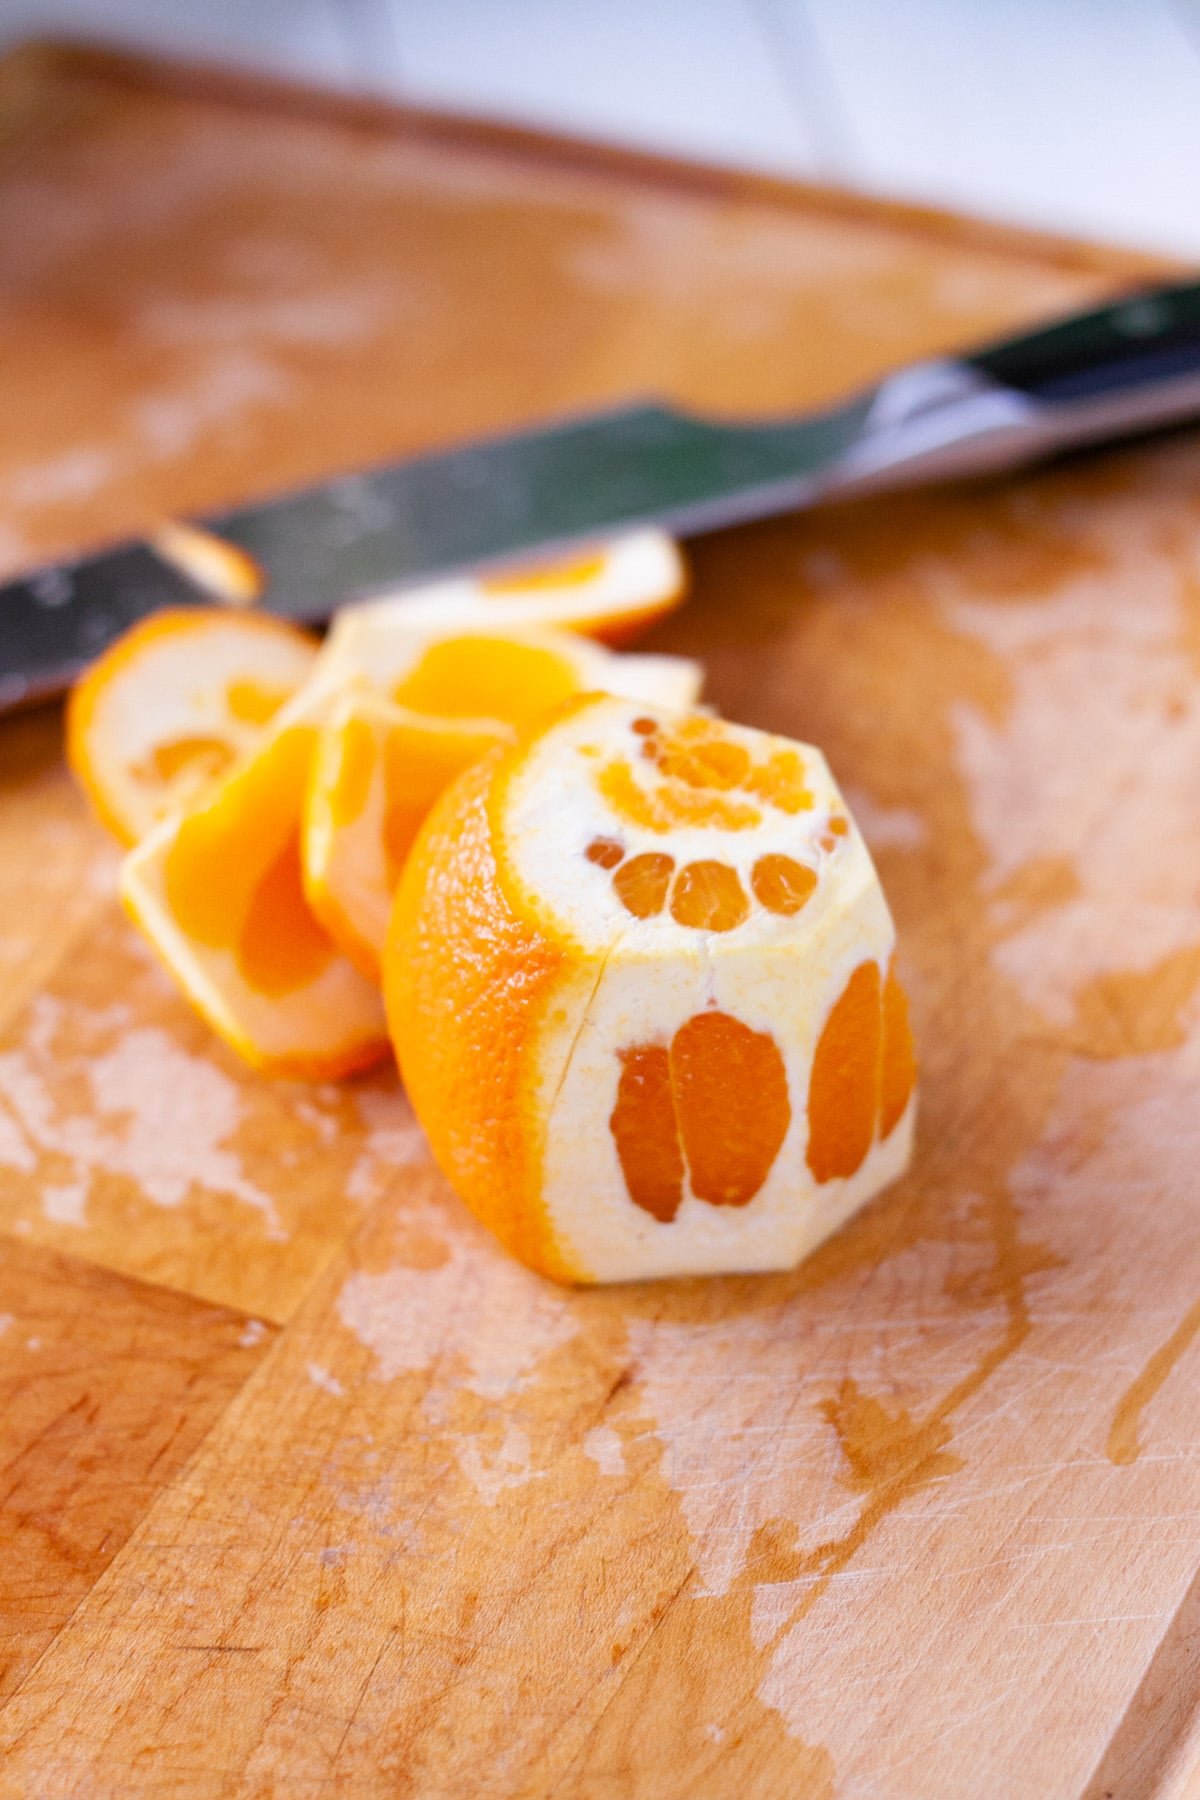 Cutting the rind from oranges